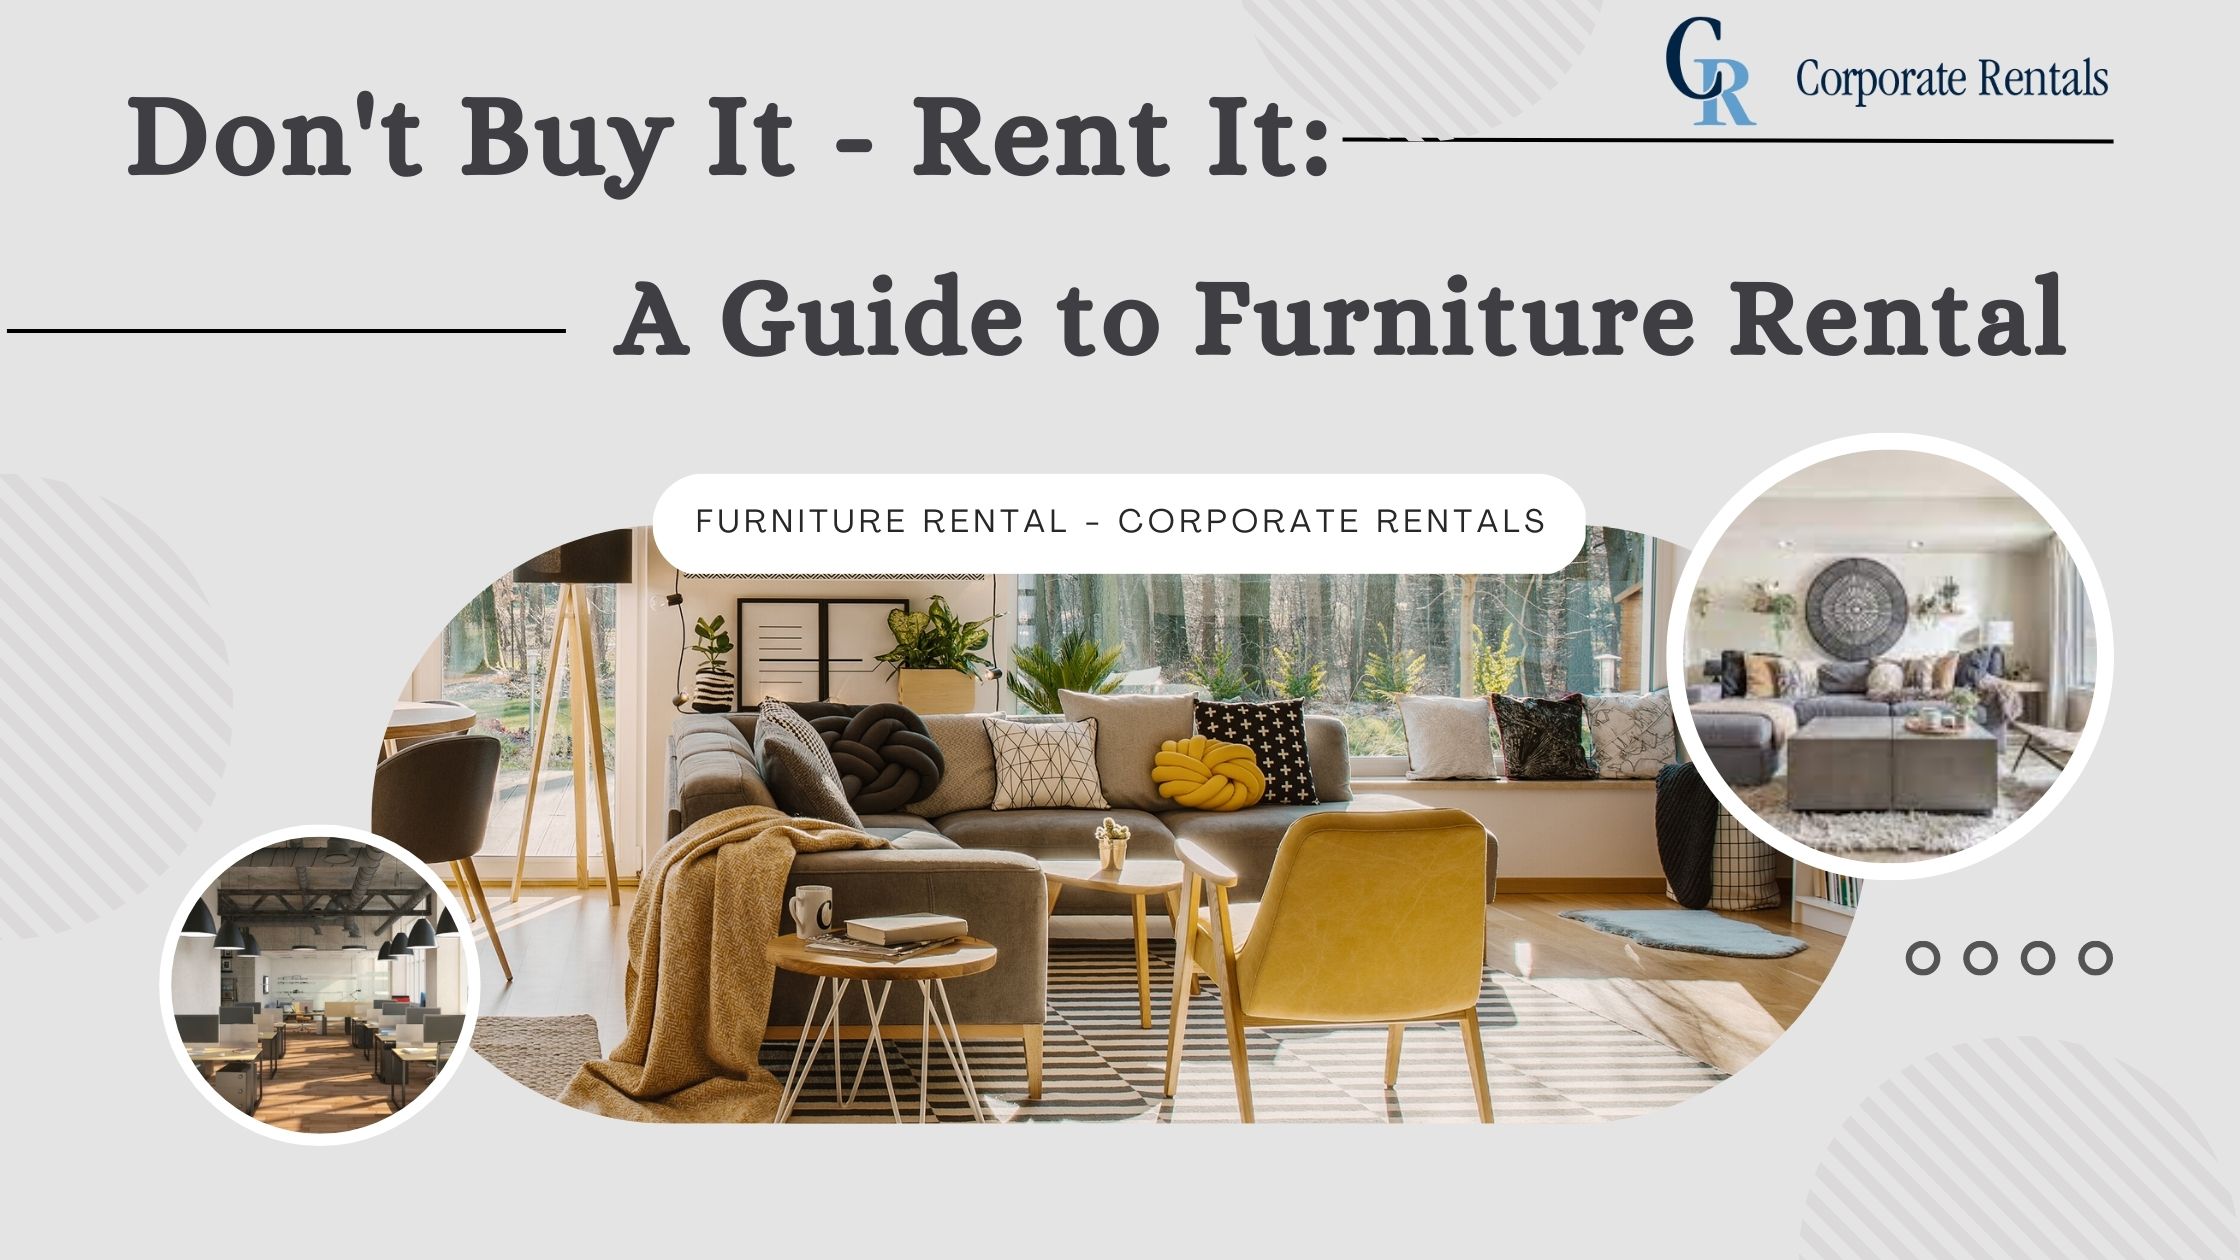 Don’t Buy It – Rent It: A Guide to Furniture Rental